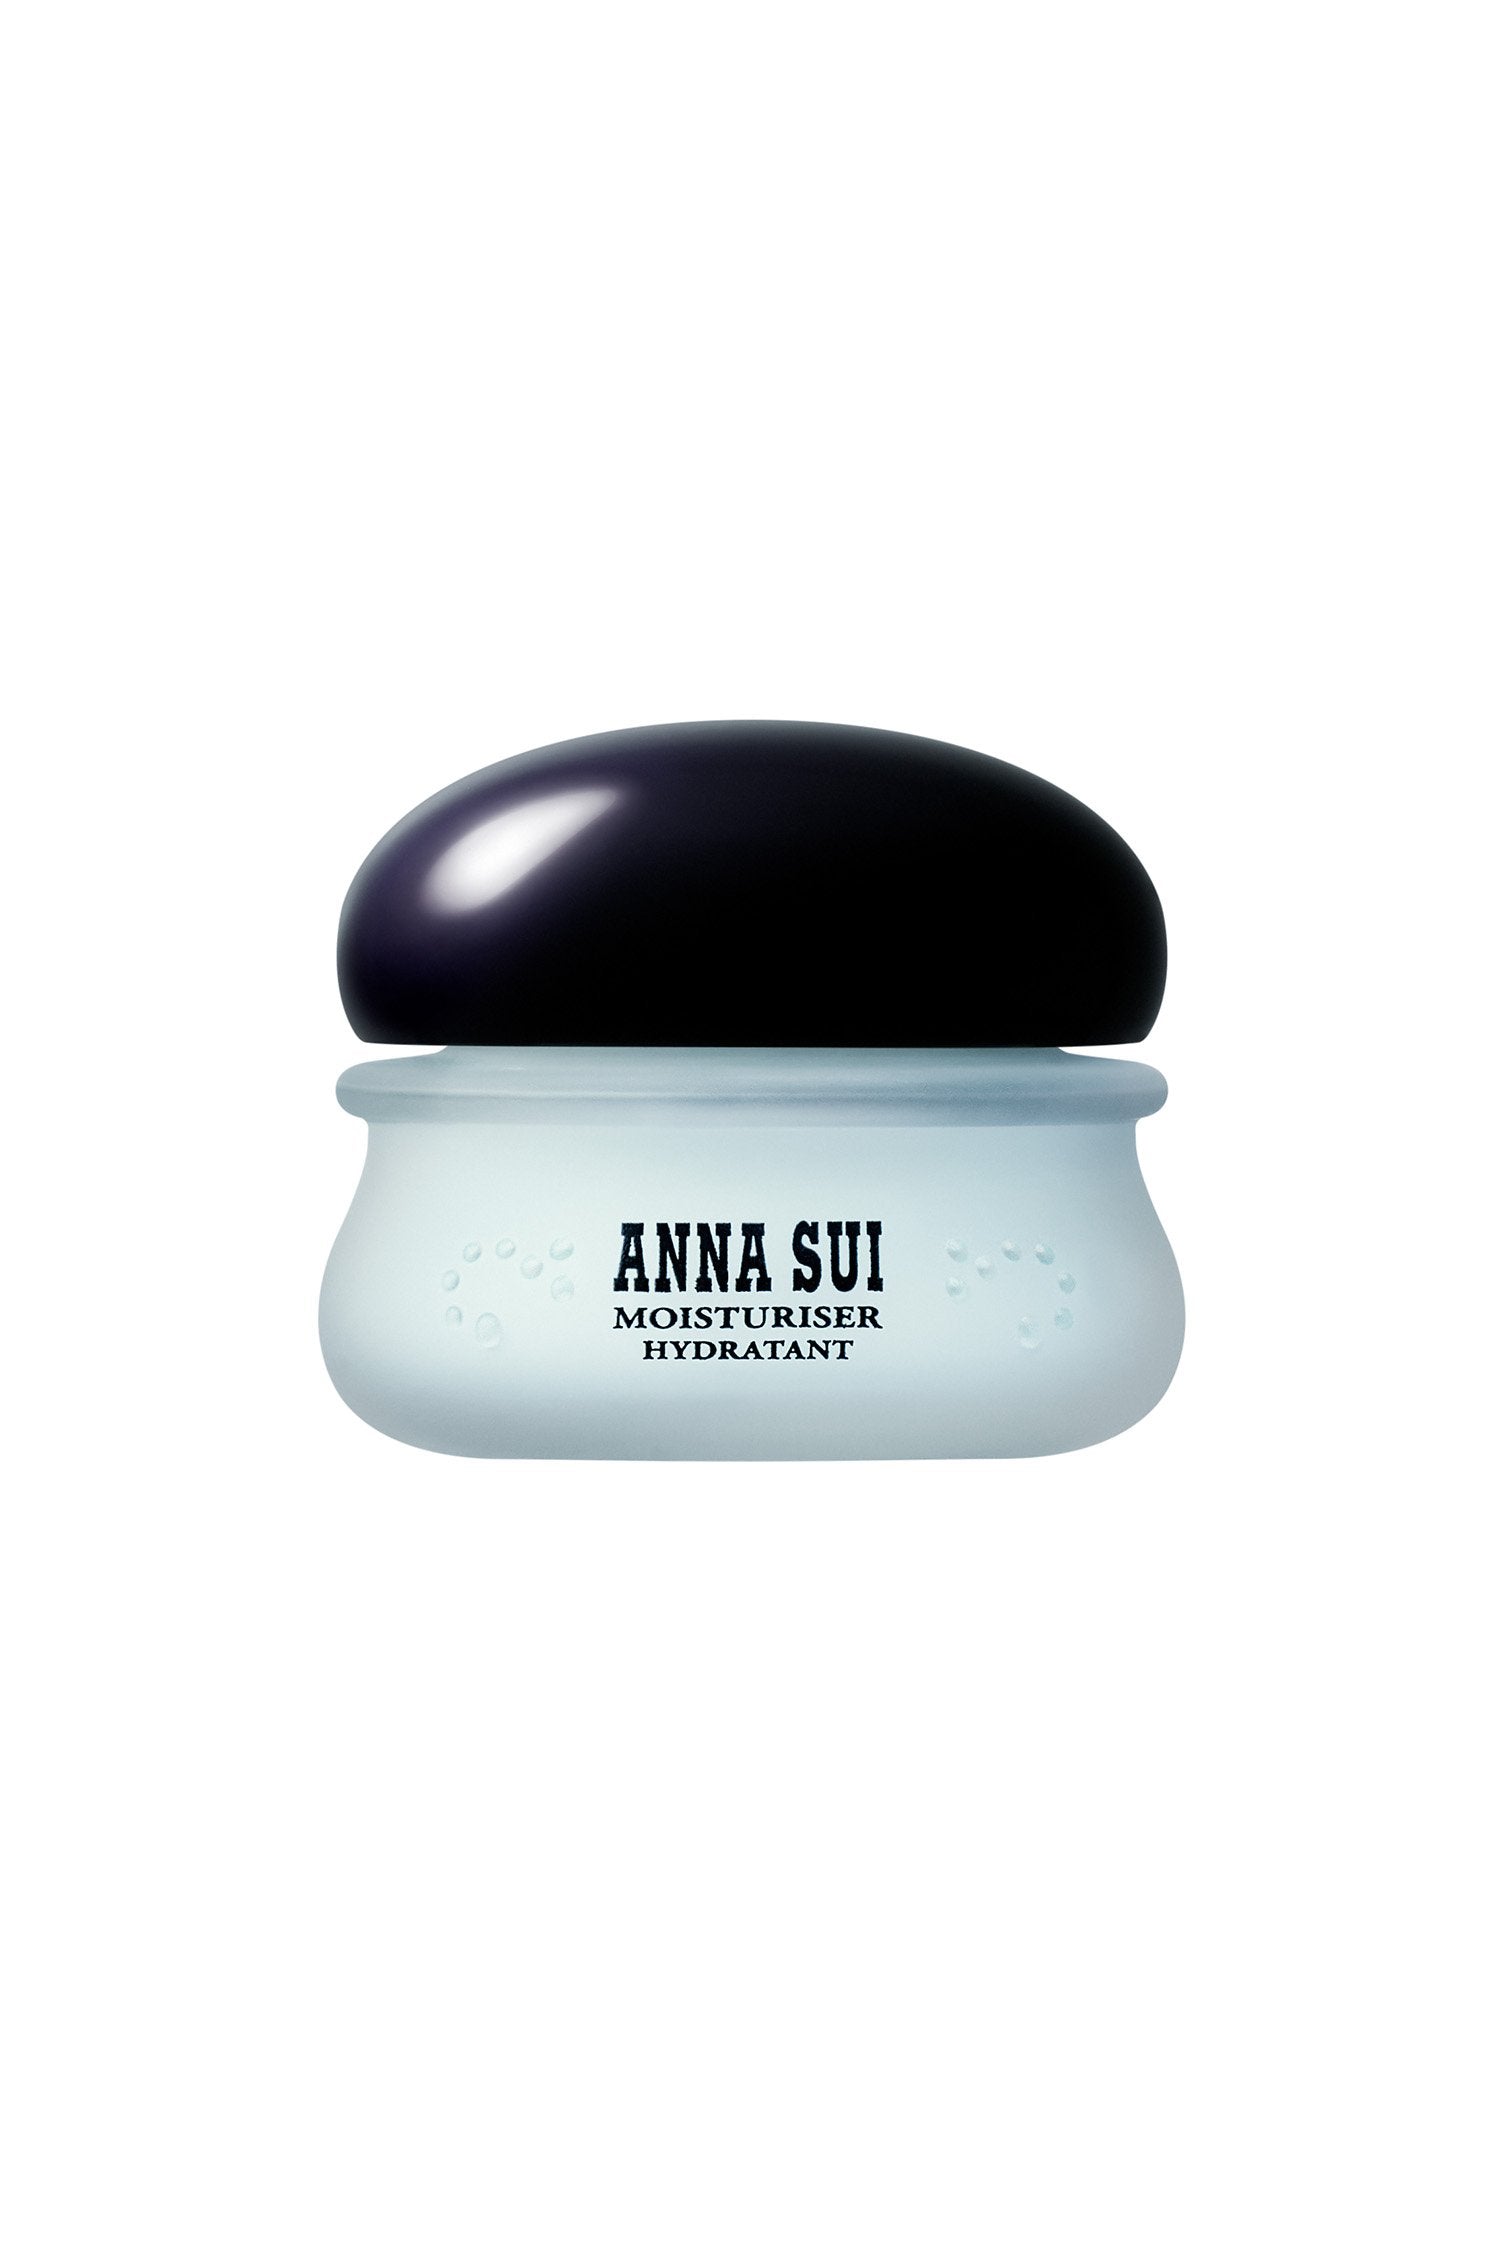 Bluish round container, black rounded lid, Anna Sui & Moisturizer Hydratant branding on container